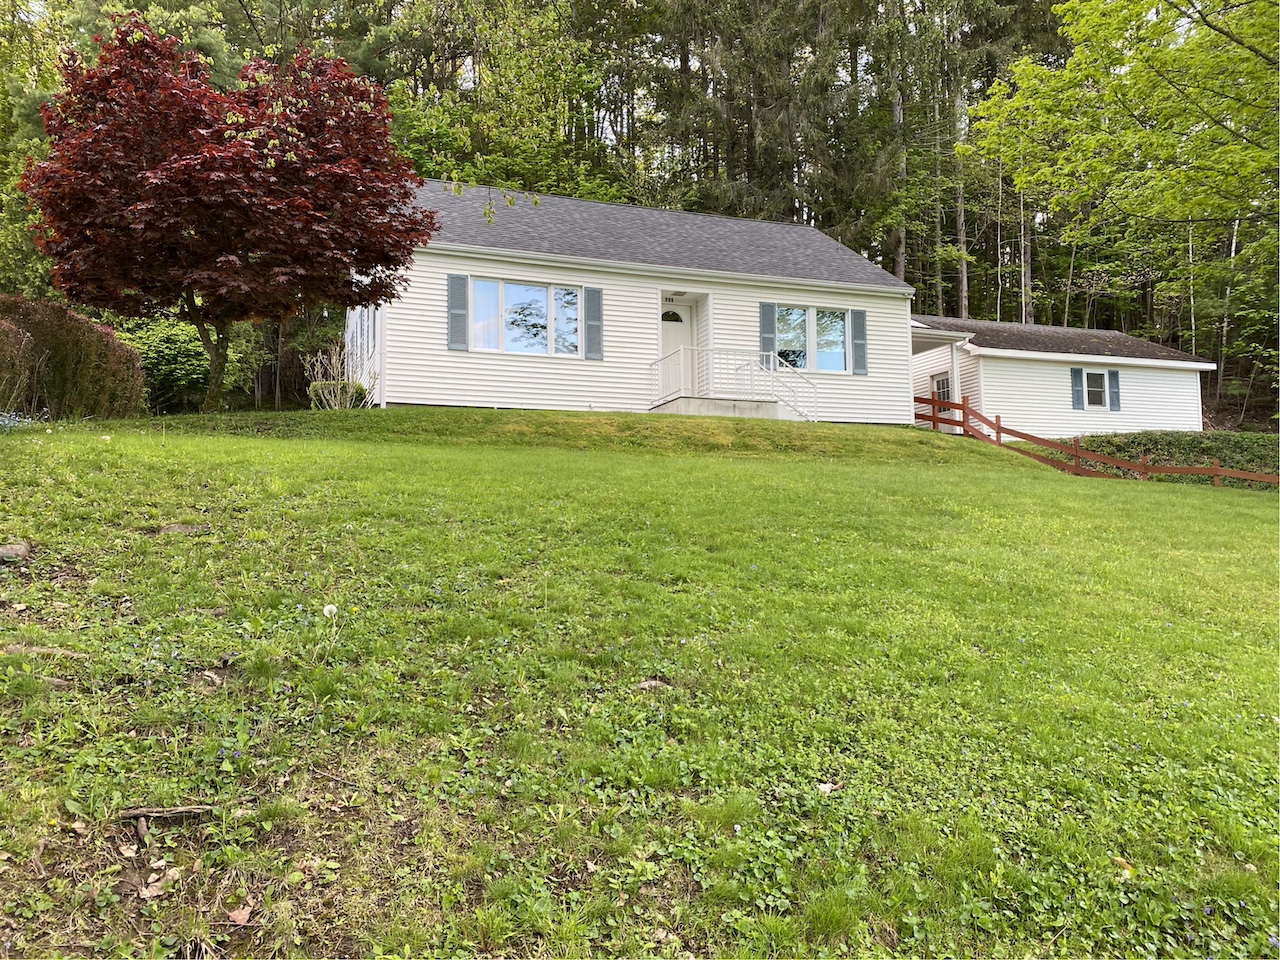 House with Garage and Valley Views in the Village of Wellsville NY 205 N Highland Avenue